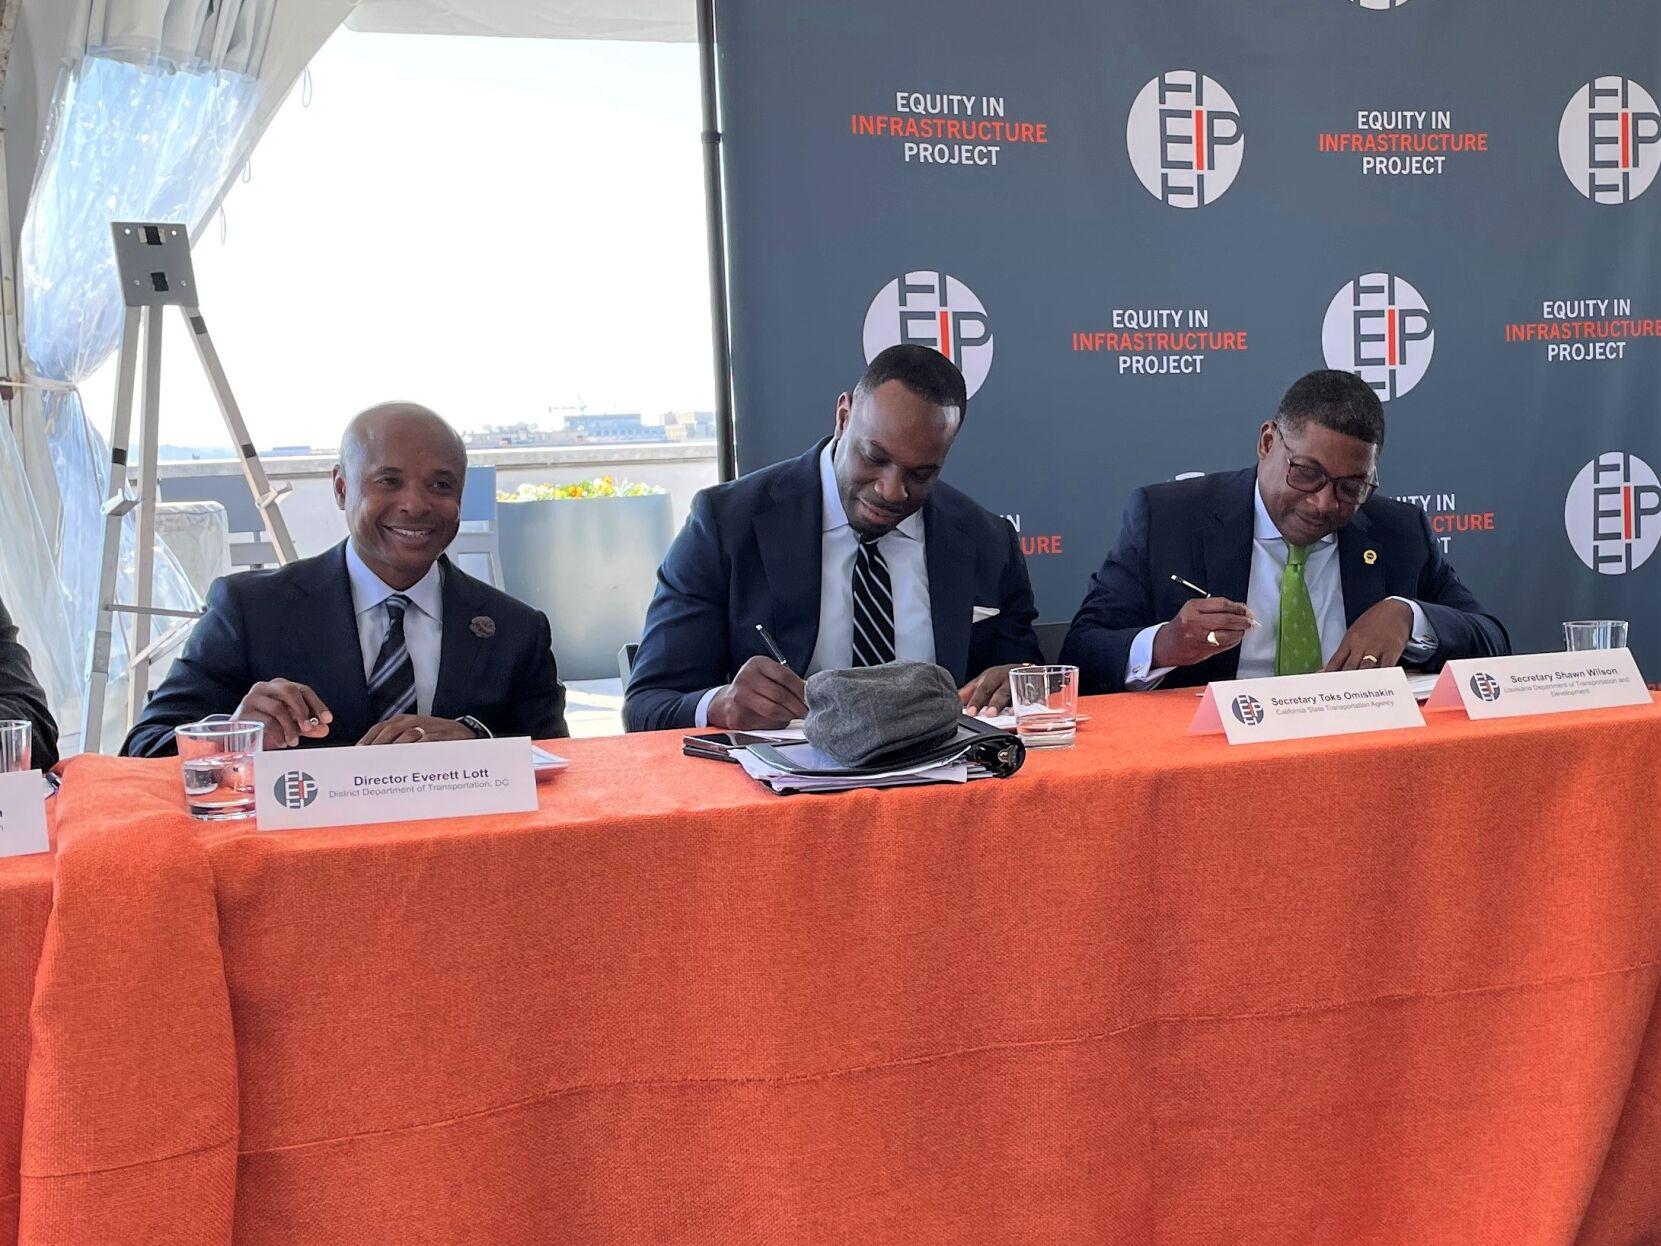 Shawn Wilson, secretary of the Louisiana Department of Transportation and Development, on right, signs onto the Equity in Infrastructure Project on Tuesday, Oct. 11, 2022, along with heads of five other state transportation infrastructure agencies.